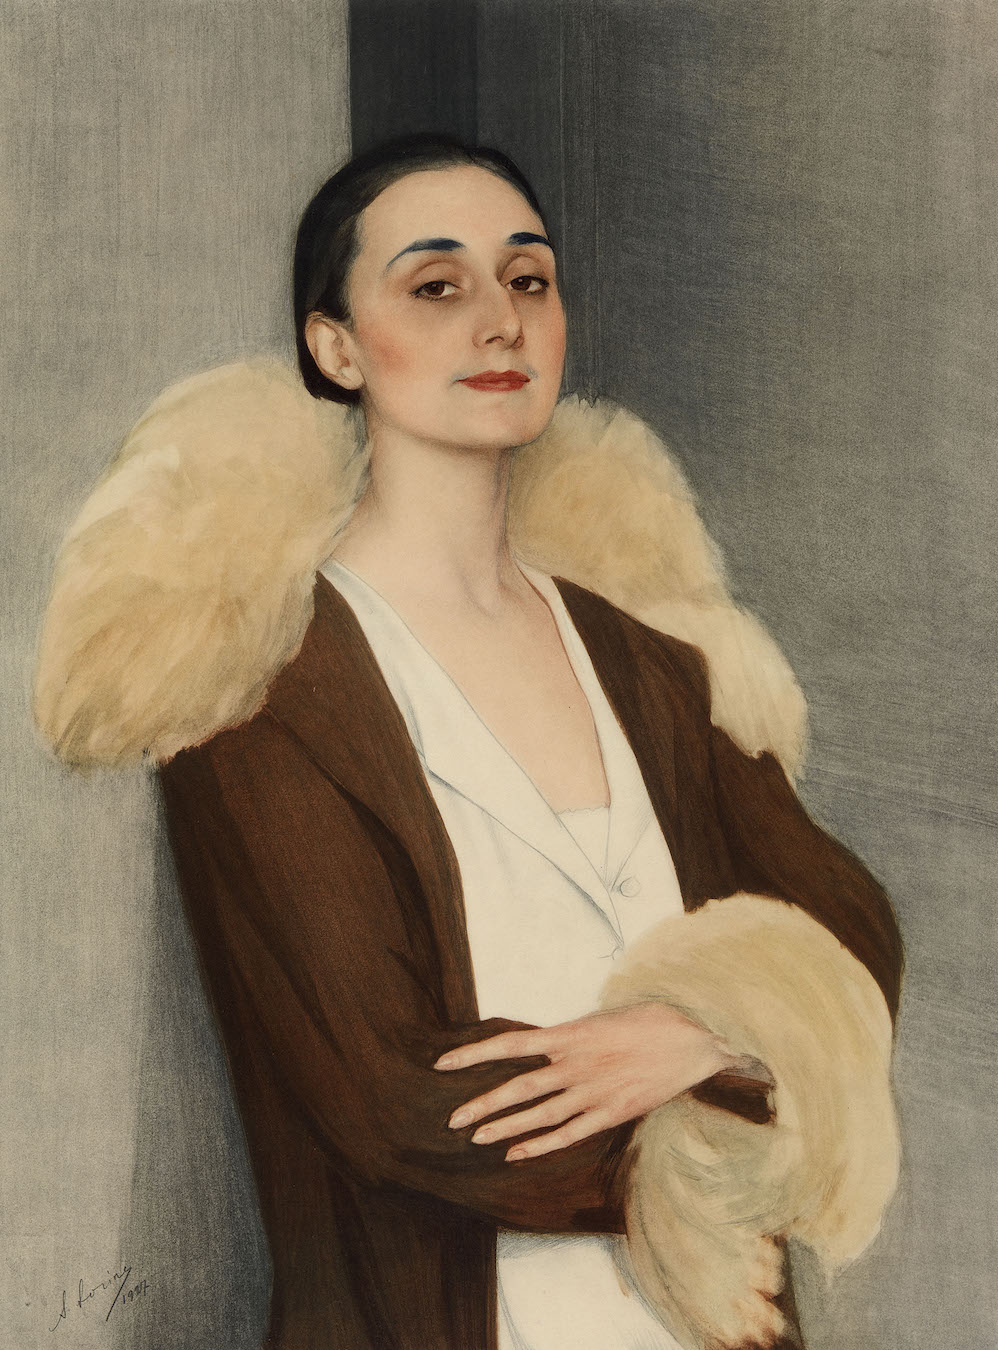 A Book of Portraits, including Anna Pavlova, Prince and Princess Obolensky and the Queen Consort Elizabeth Bowes-Lyon, Avant-propos by André Salmon, Berlin, Edition Ganymed, 1929.